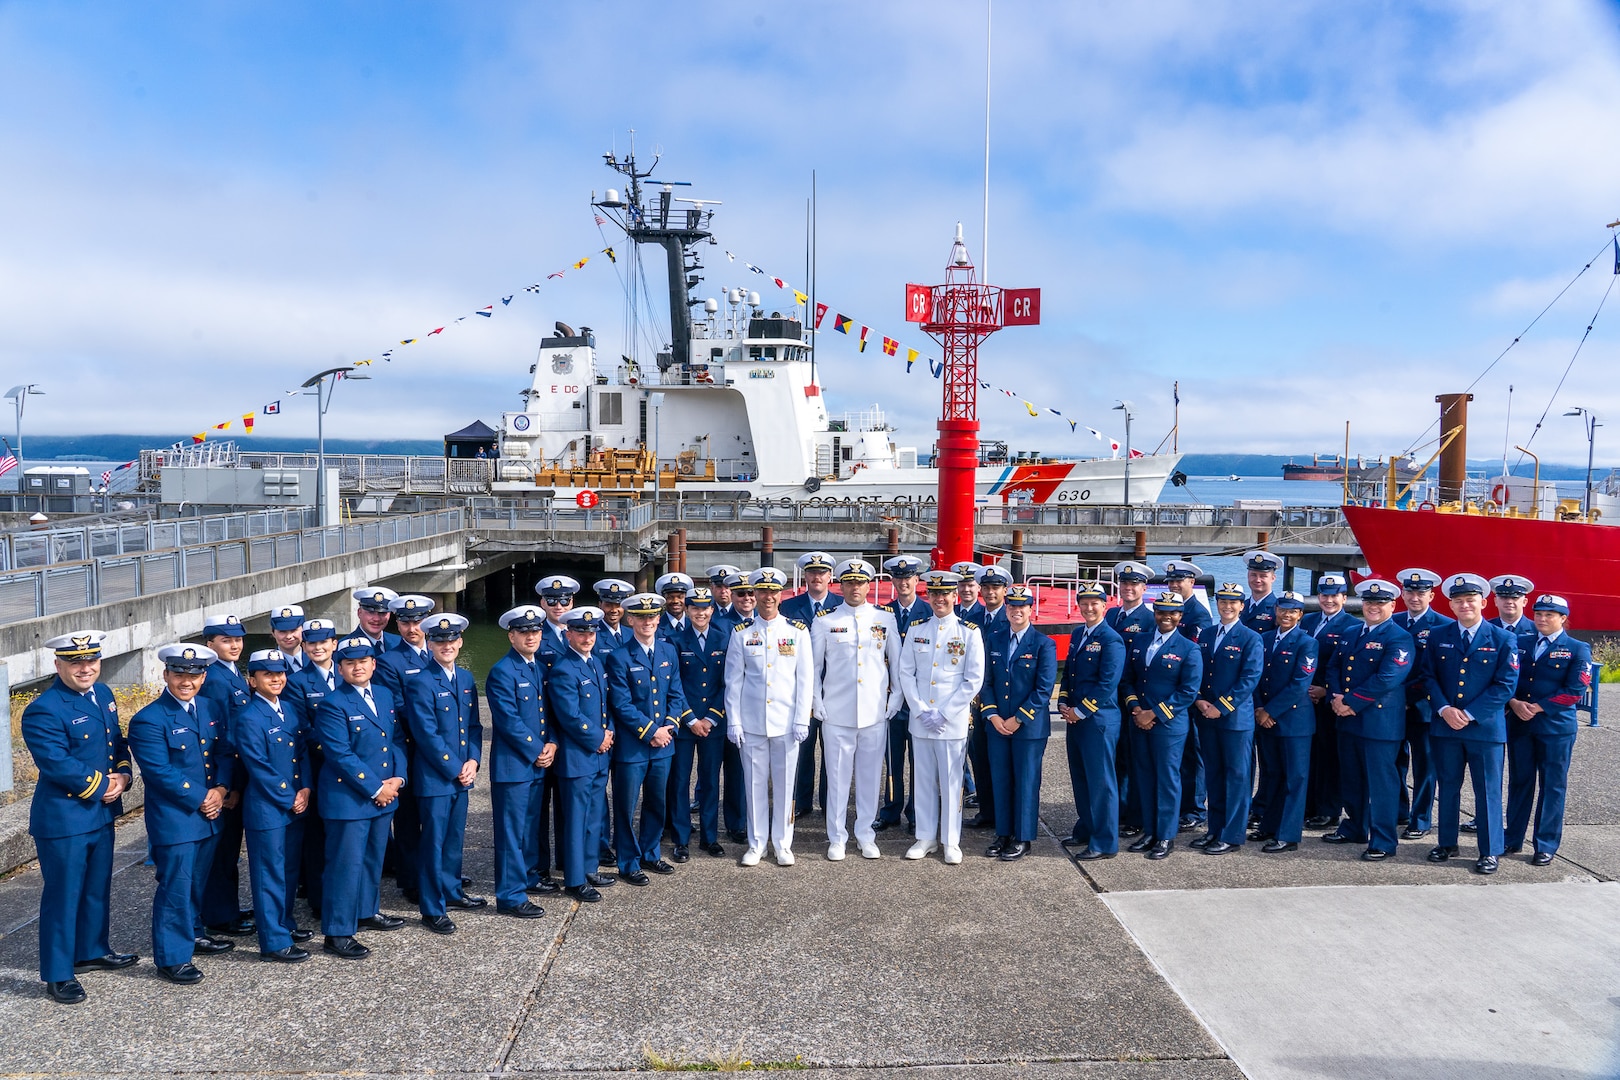 Cmdr. Lee Crusius, the commanding officer of Coast Guard Cutter Alert (WMEC 630), Lt. Cmdr. Nicholas Sharpe, the executive officer, and Cmdr. Matthew Kolodica pose for a photo with the cutter's crew in Astoria, Oregon, June 29, 2023. The crew conducted a change of command ceremony, where Crusius relieved Kolodica as the Alert's commanding officer. (U.S. Coast Guard photo by Petty Officer 1st Class Travis Magee)